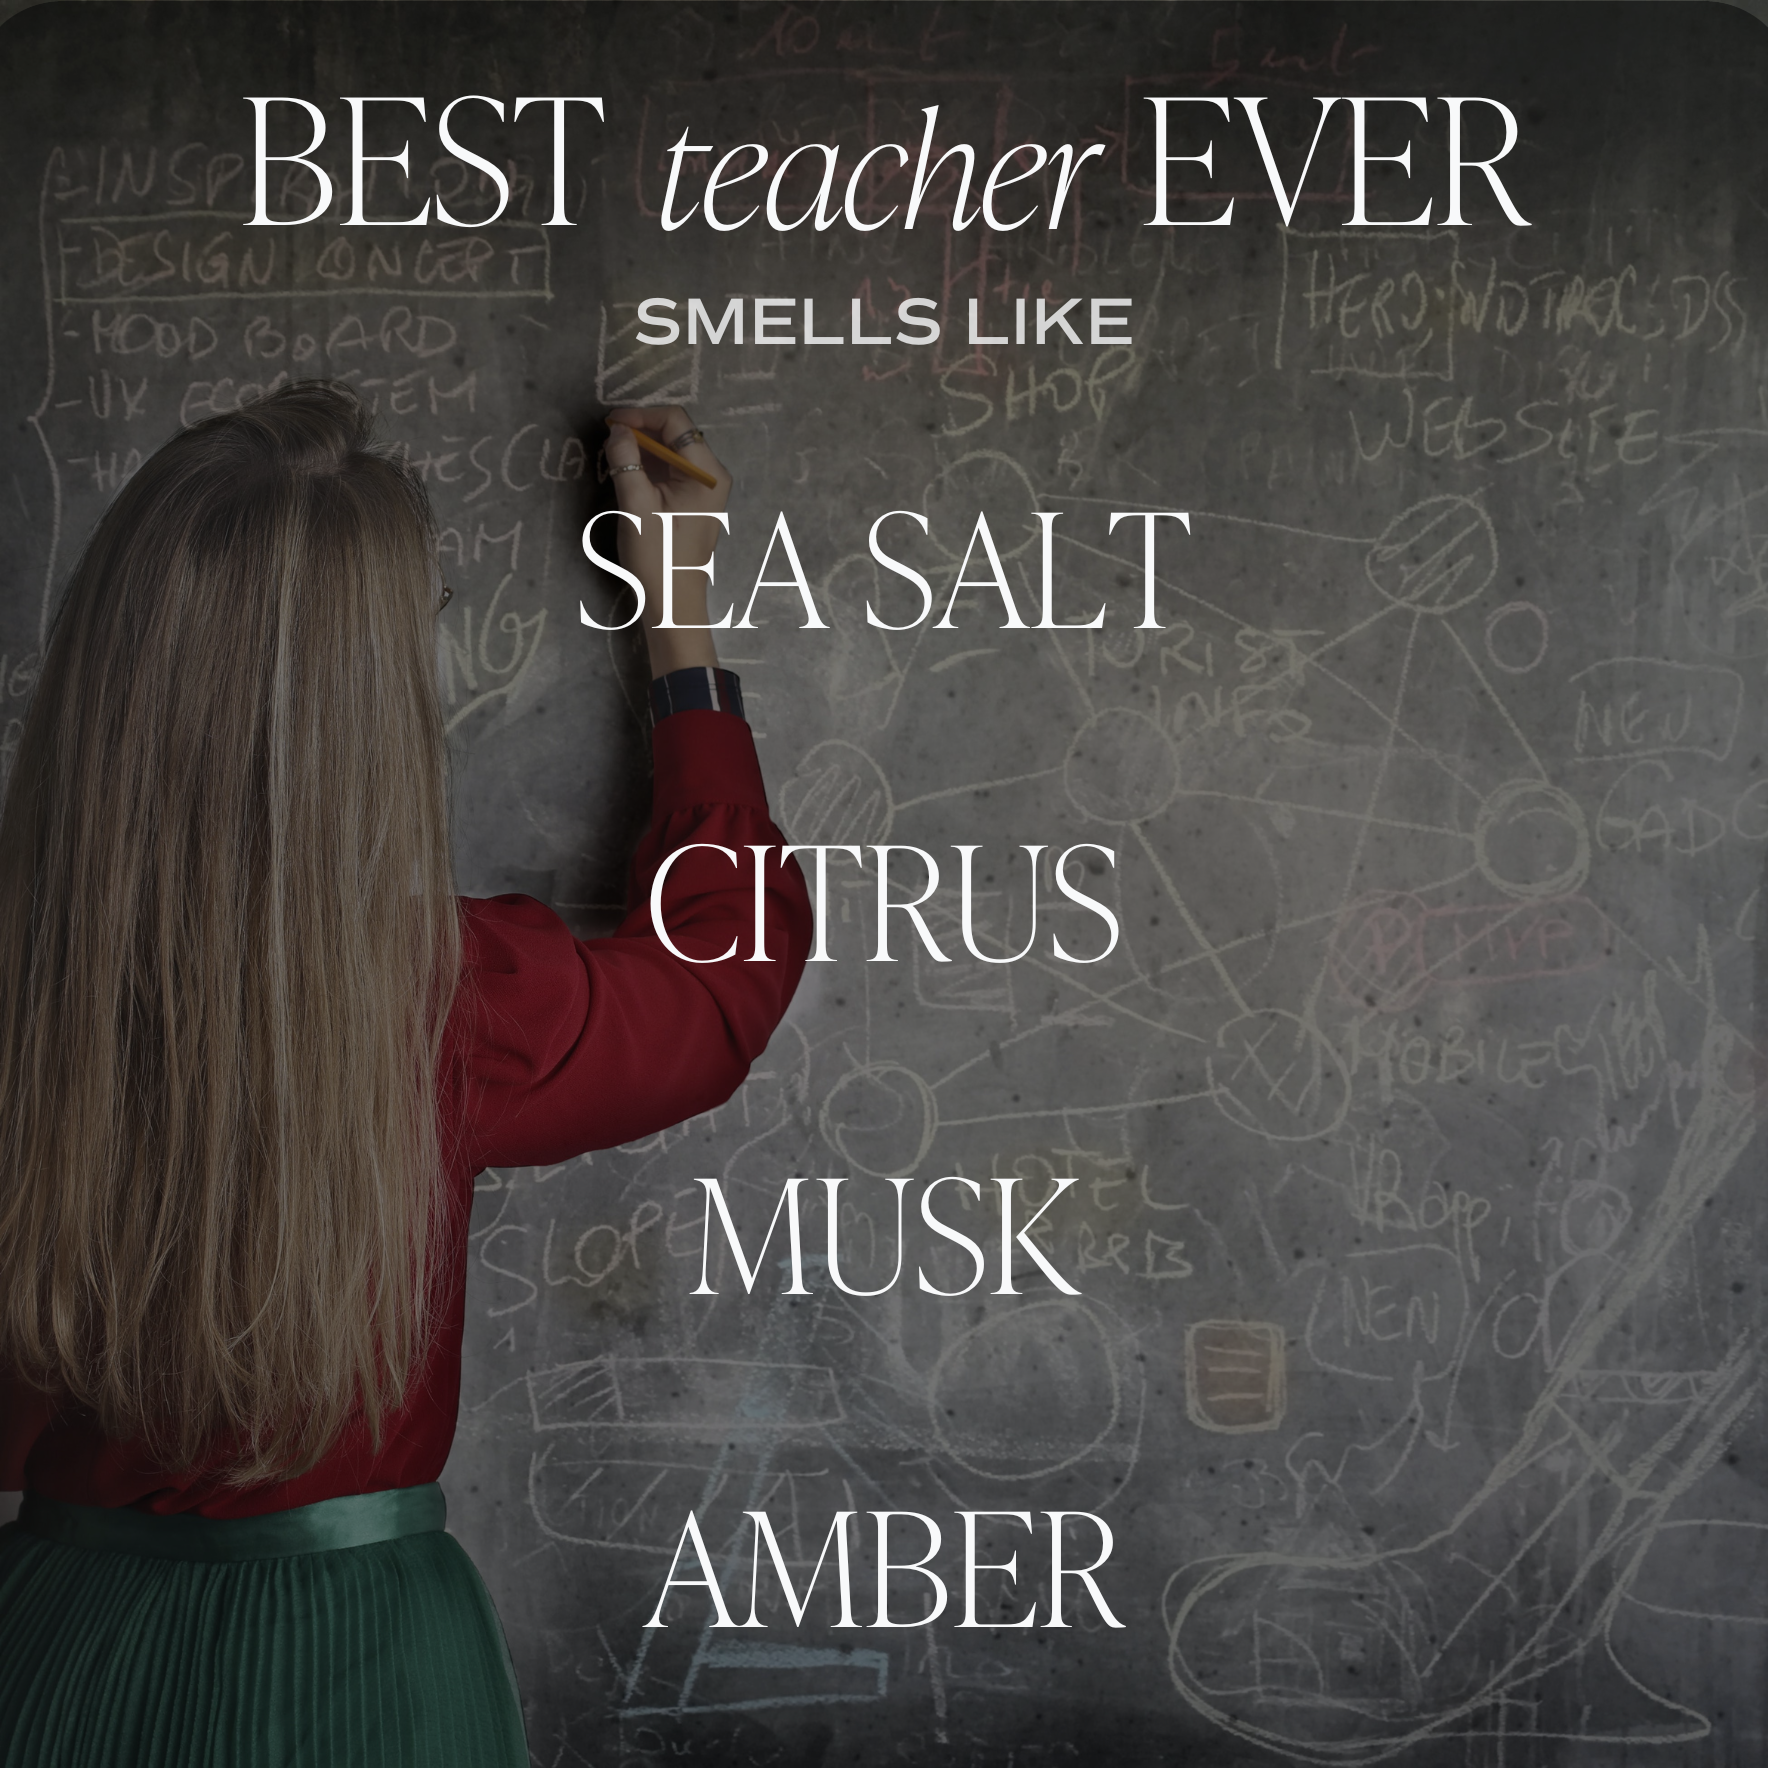 Best Teacher Soy Candle